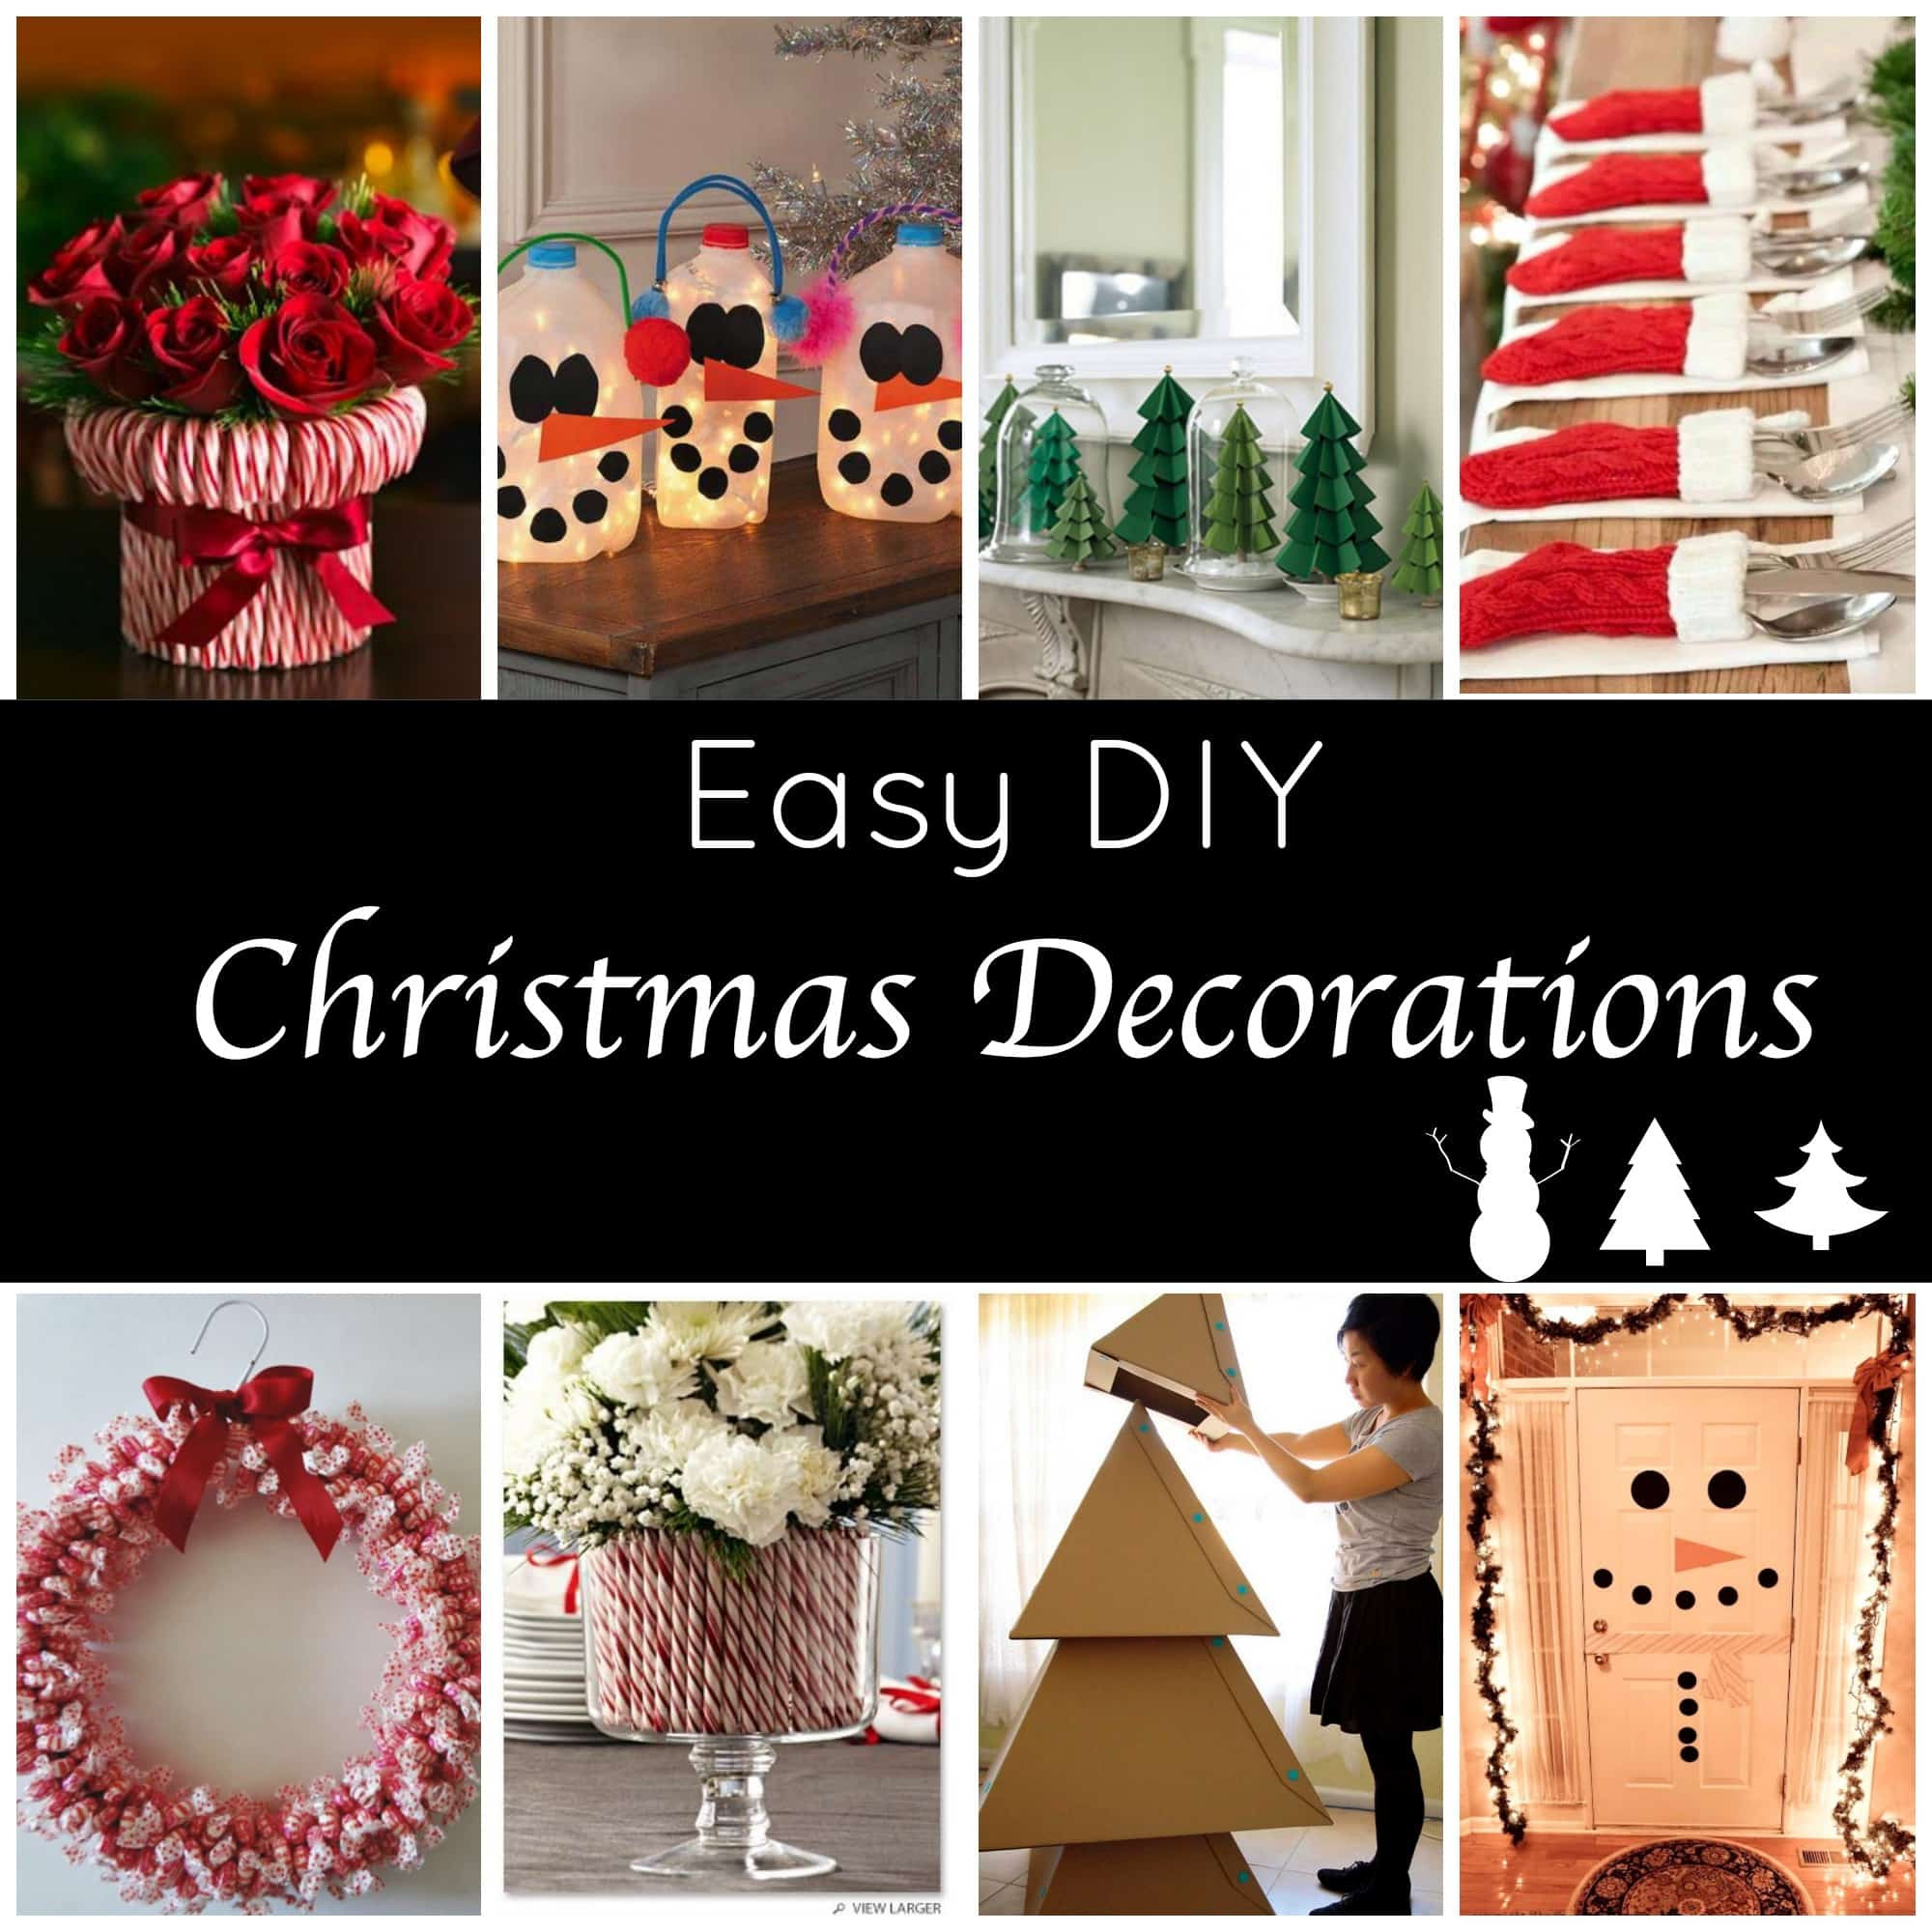 DIY Holiday Decorations
 Cute & Easy Holiday Decorations Page 2 of 2 Princess